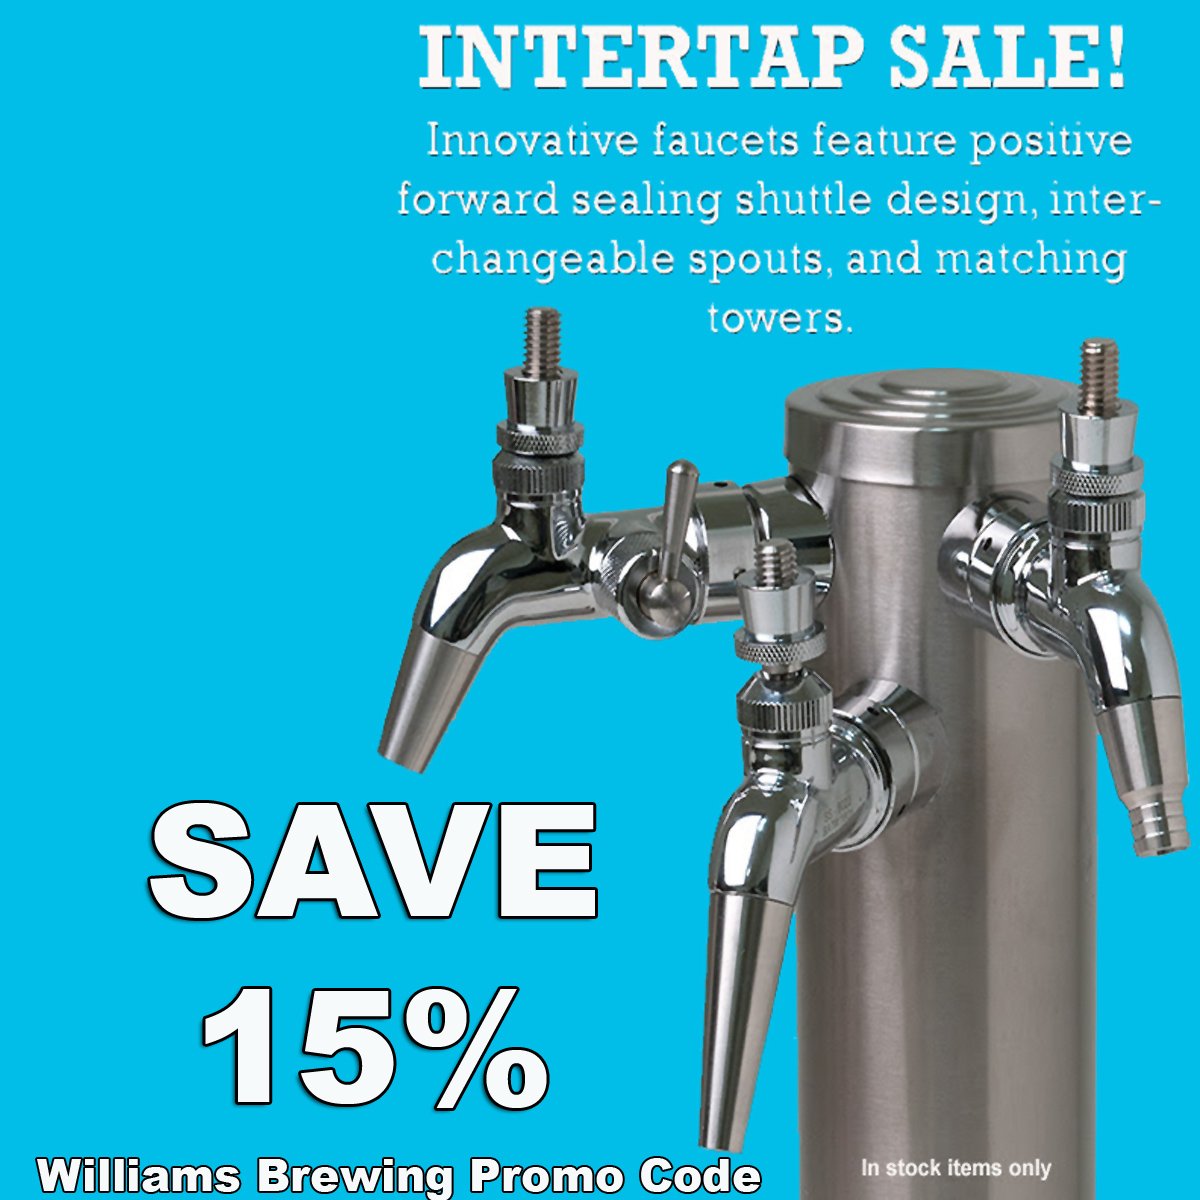 Get 15% Off Intertap Stainless Steel Beer Serving Items With This Williams Brewing Promo Code